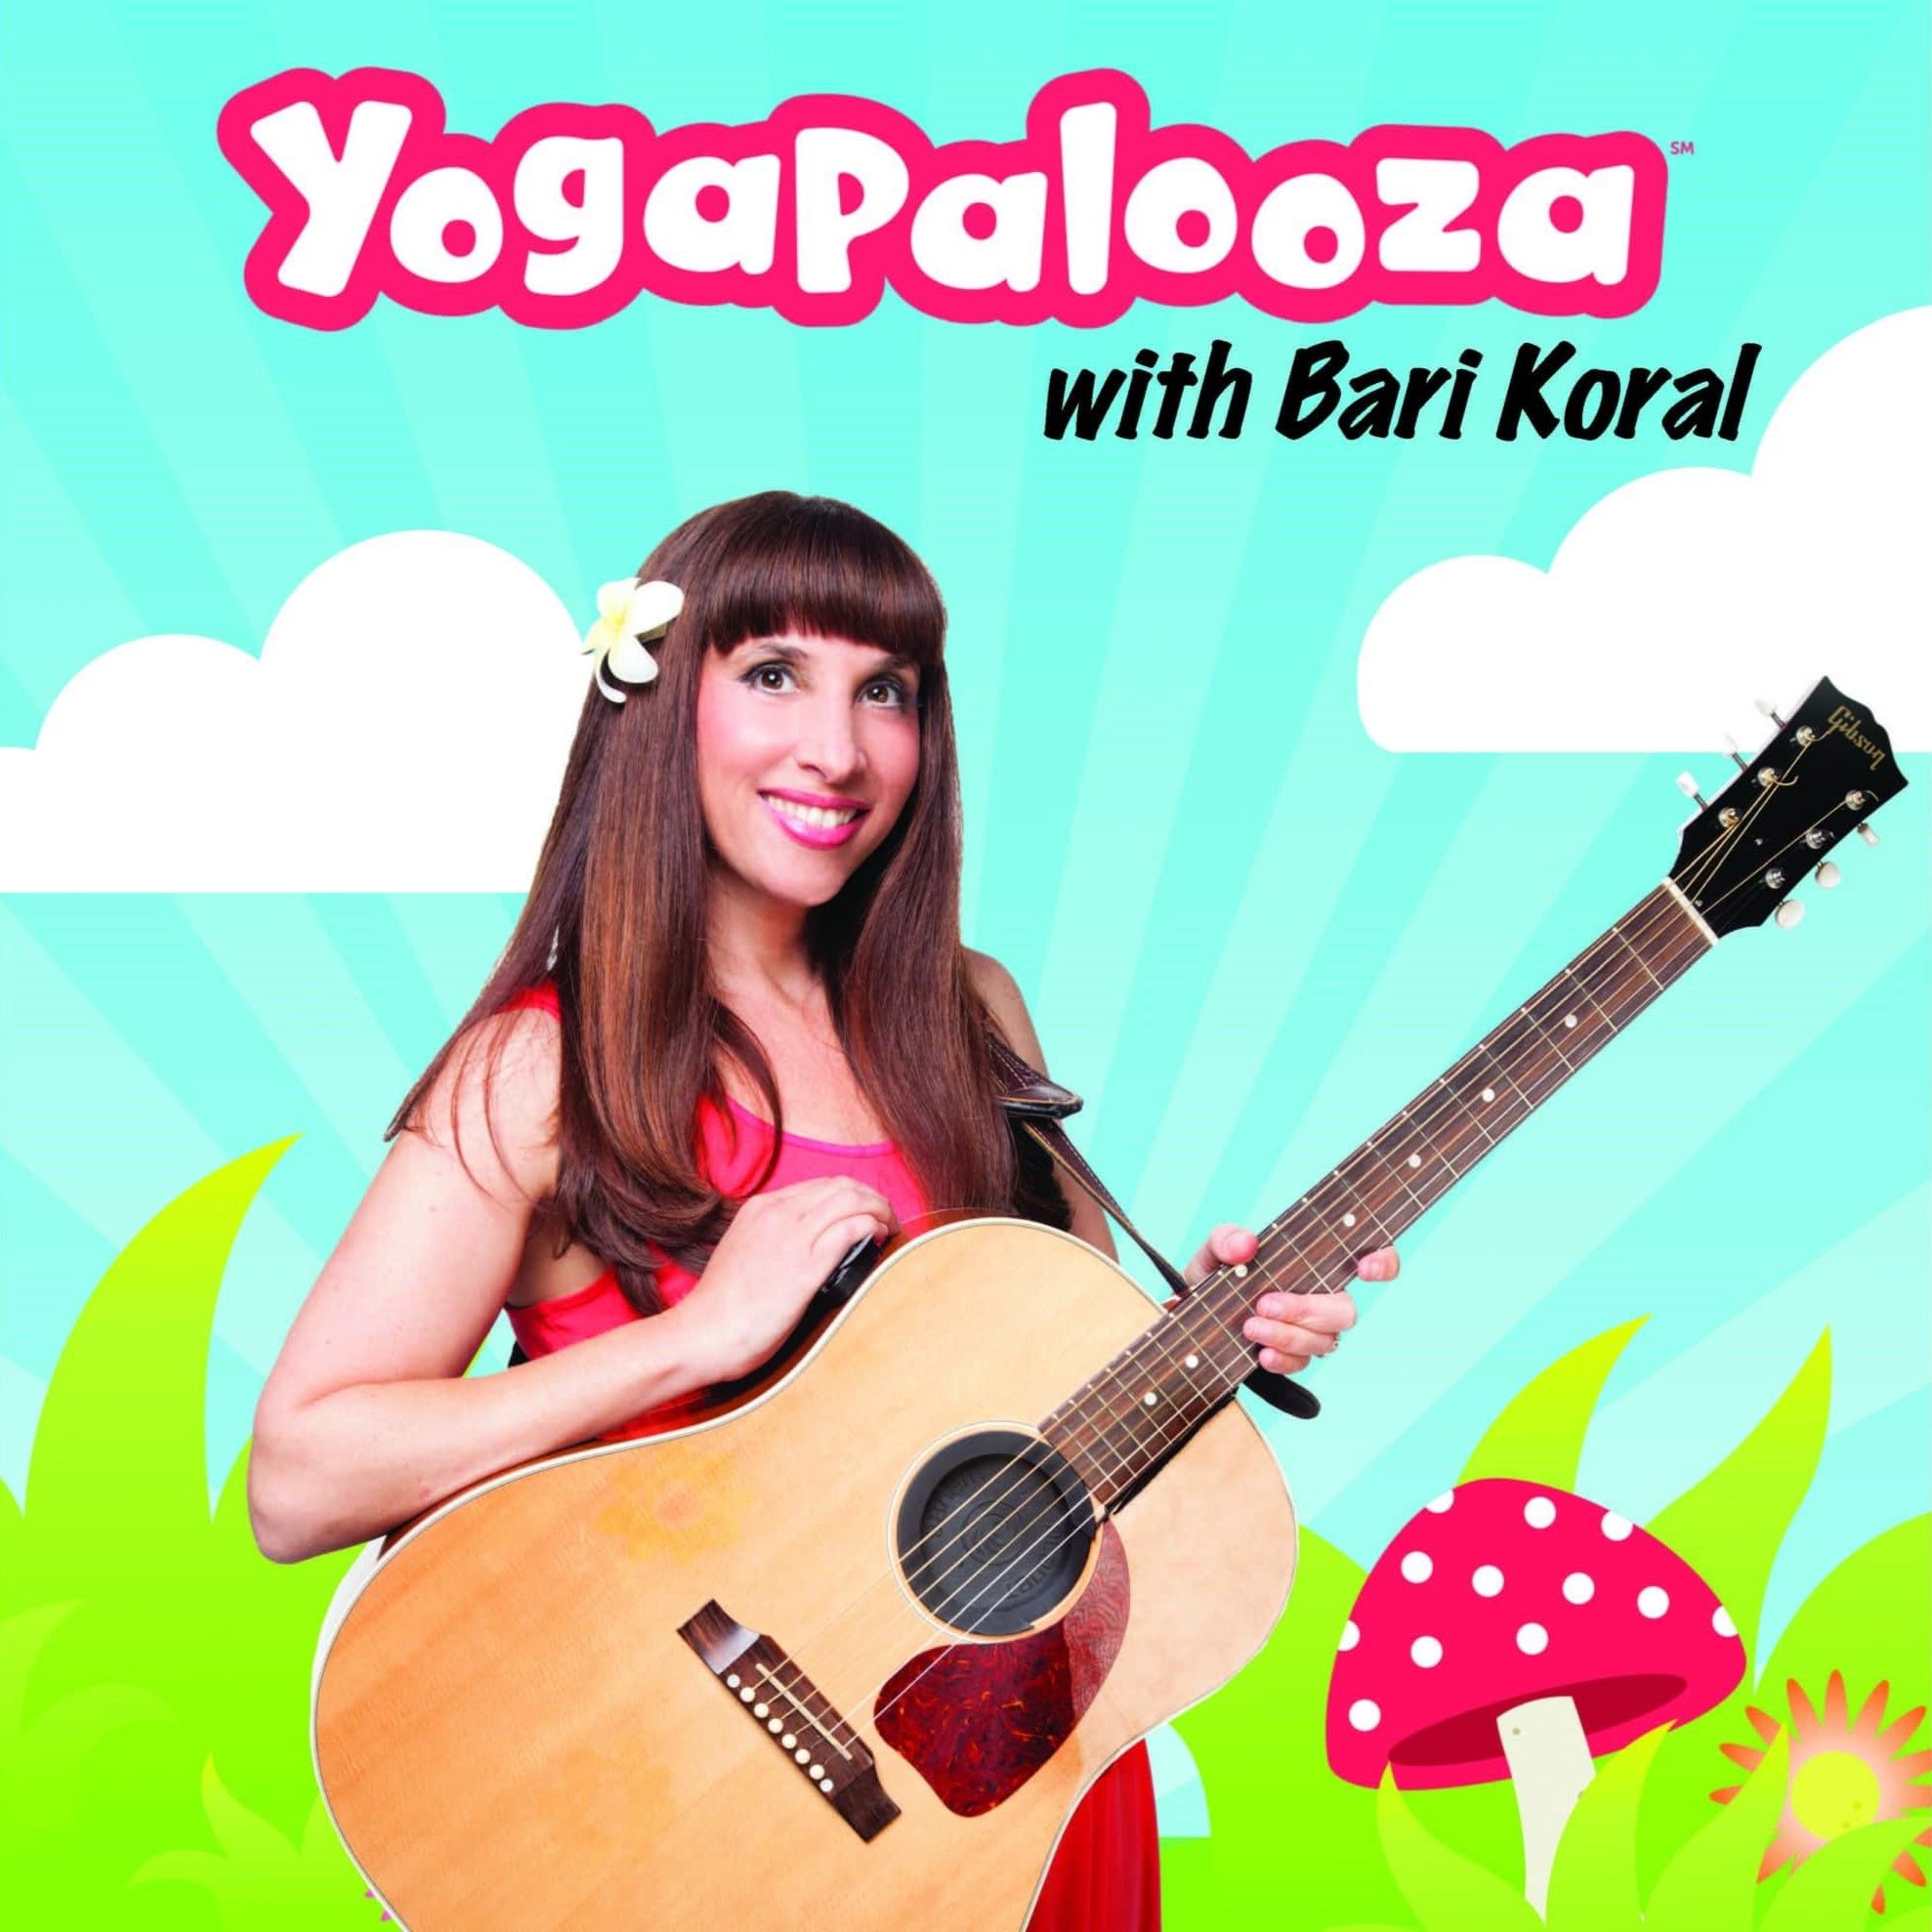 Perpetual licensing is tapped to launch the Yogapalooza program.